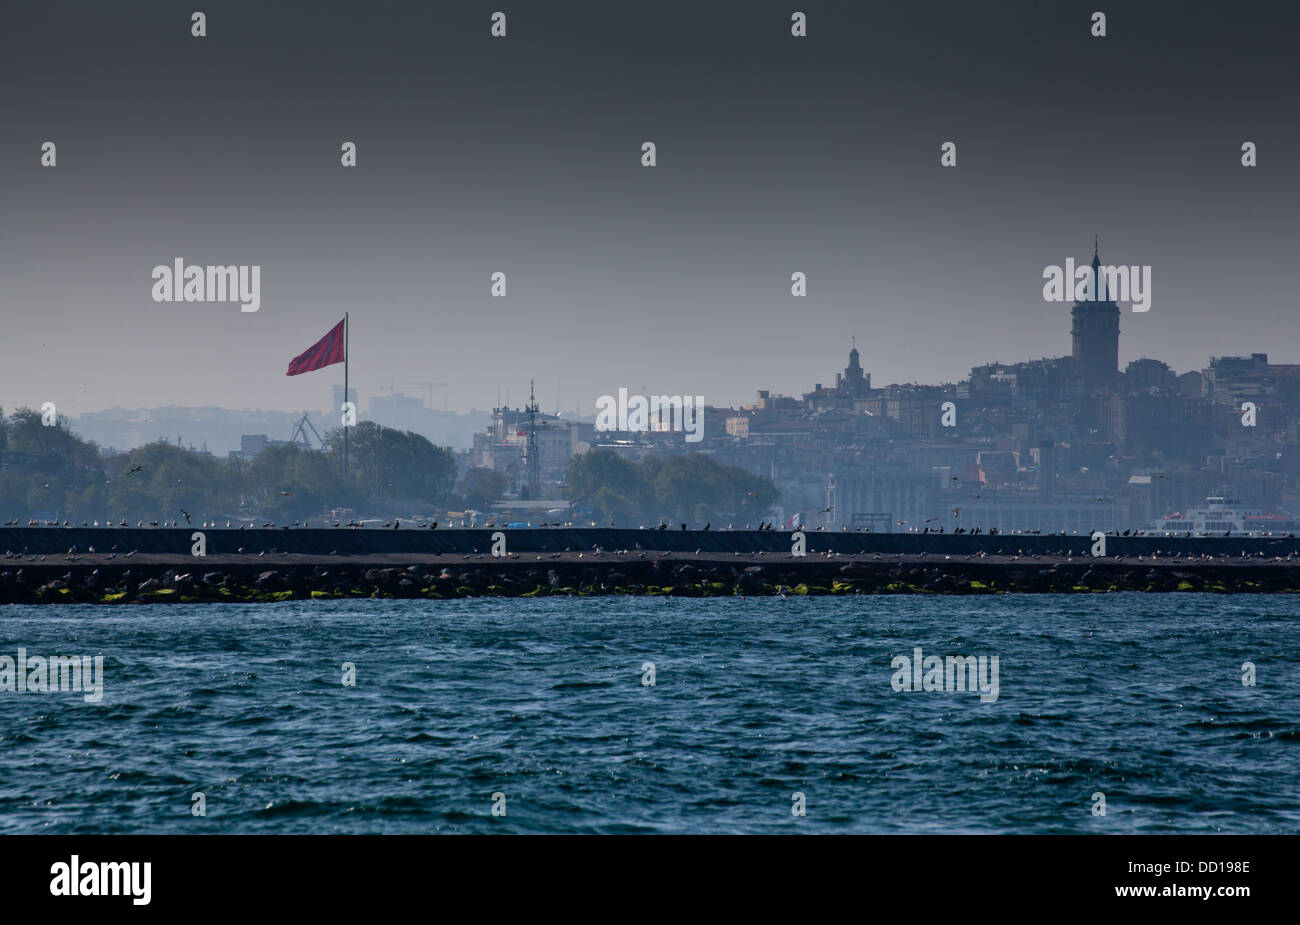 The skyline of the Bosporus including the Galata tower in Istanbul, turkey. Stock Photo